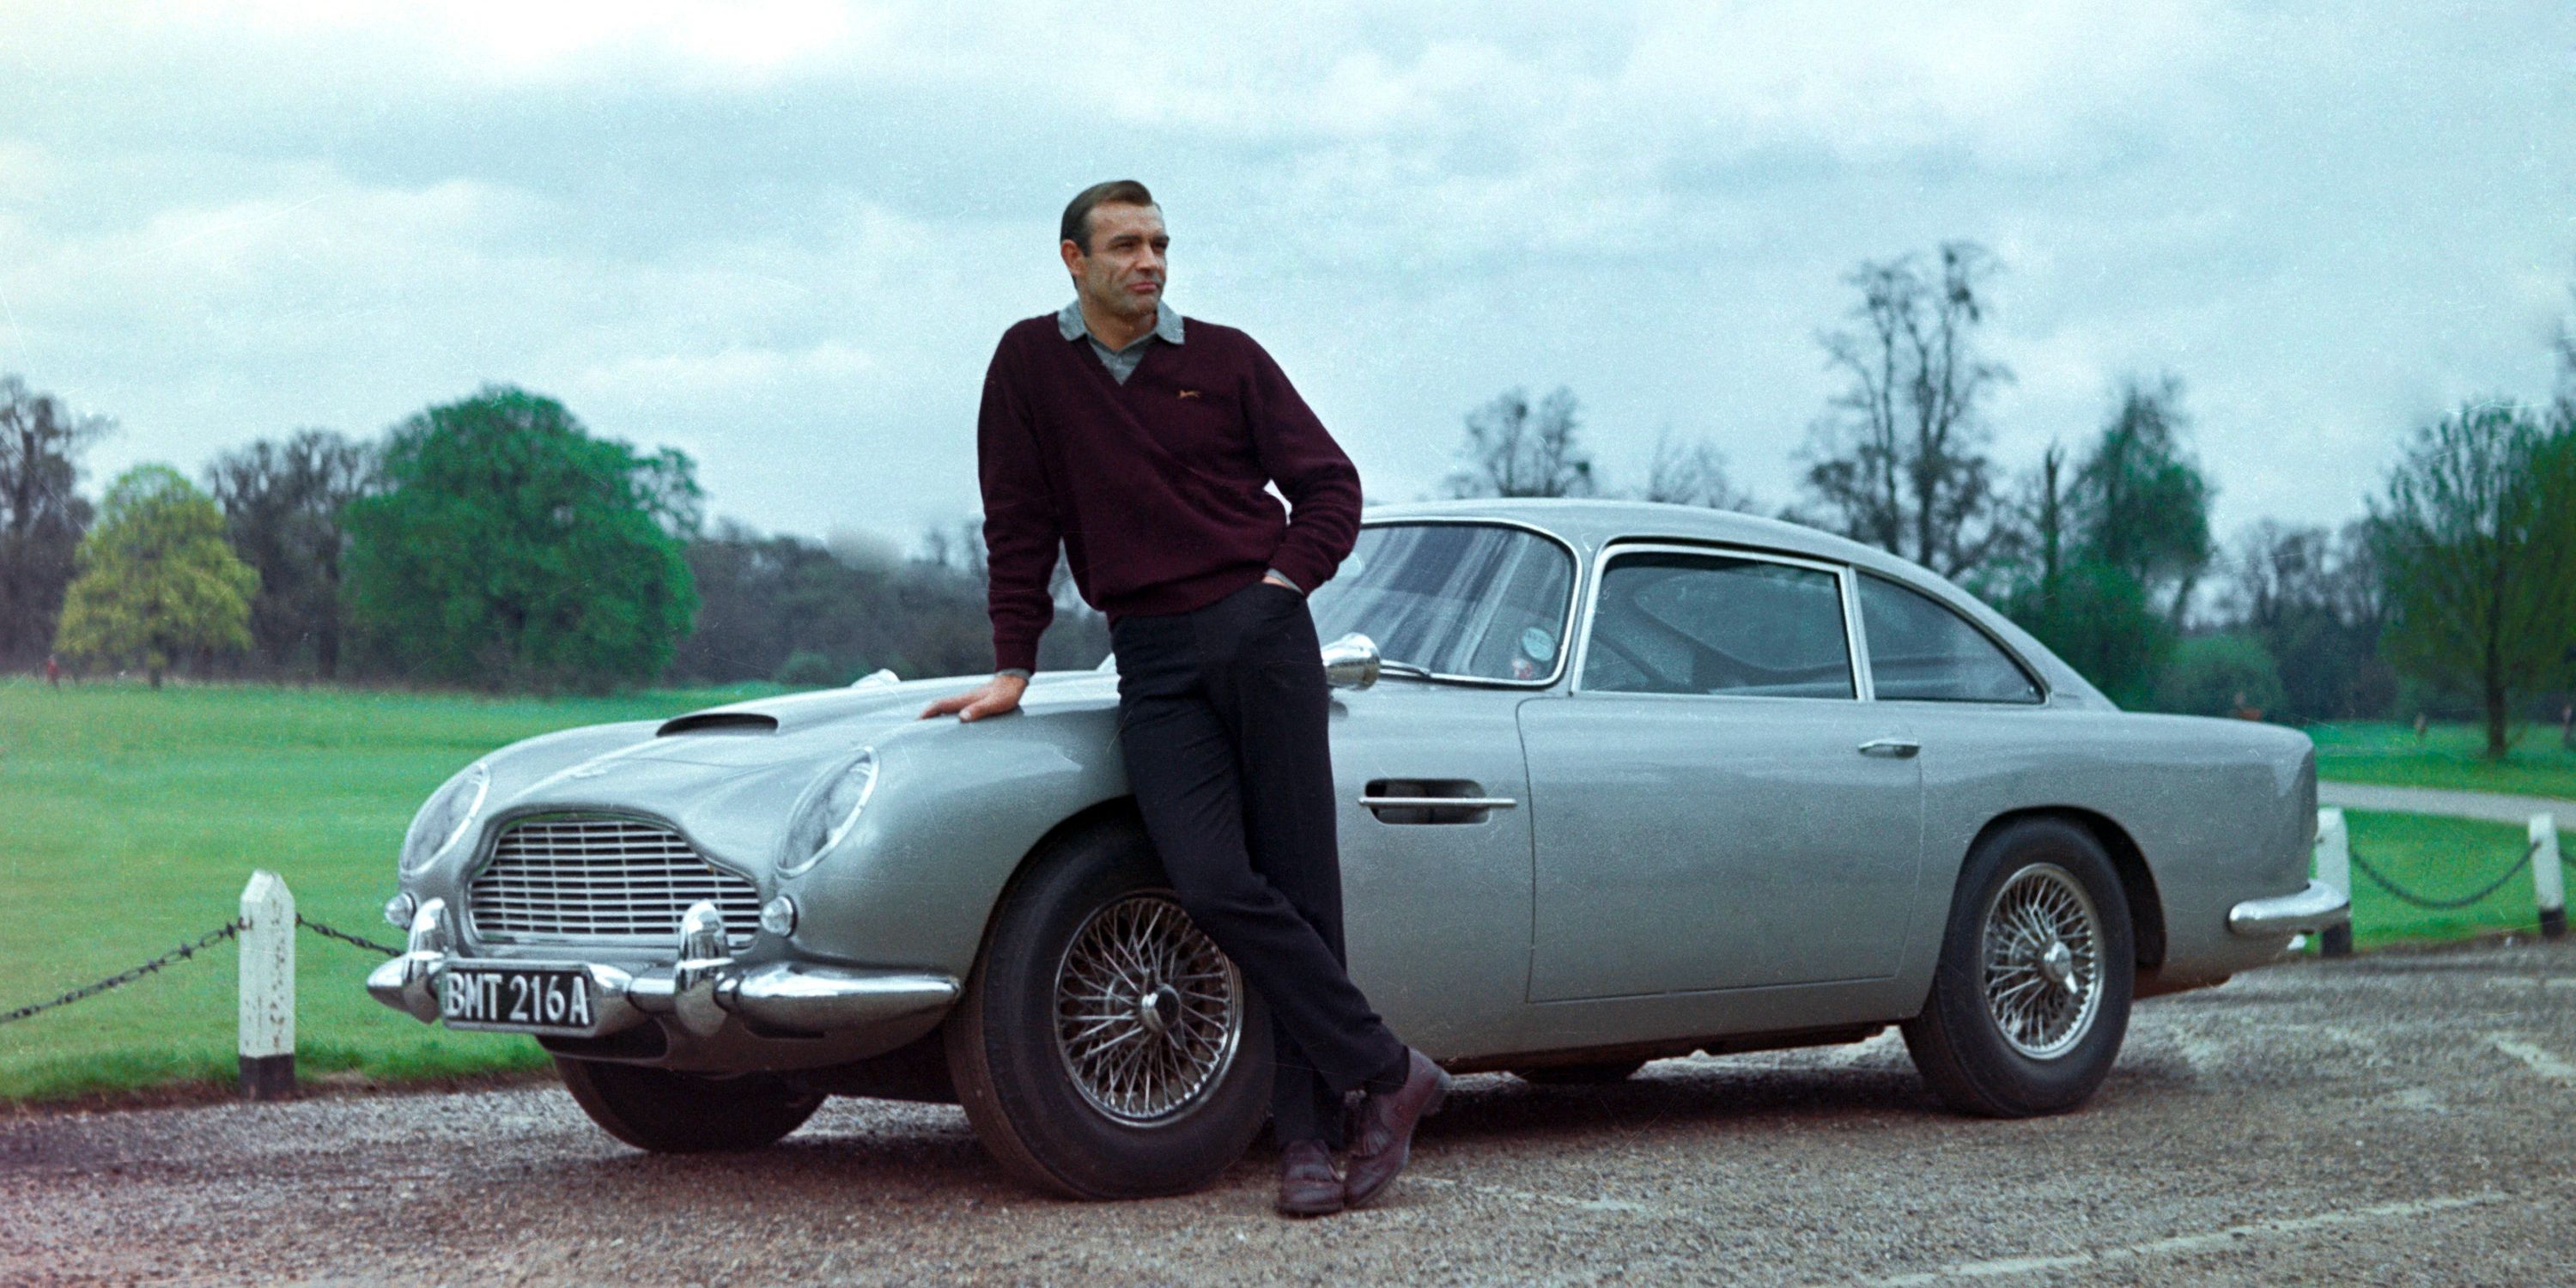 James Bond (Sean Connery) stand with his Aston Martin DB5 in a countryside driveway. 